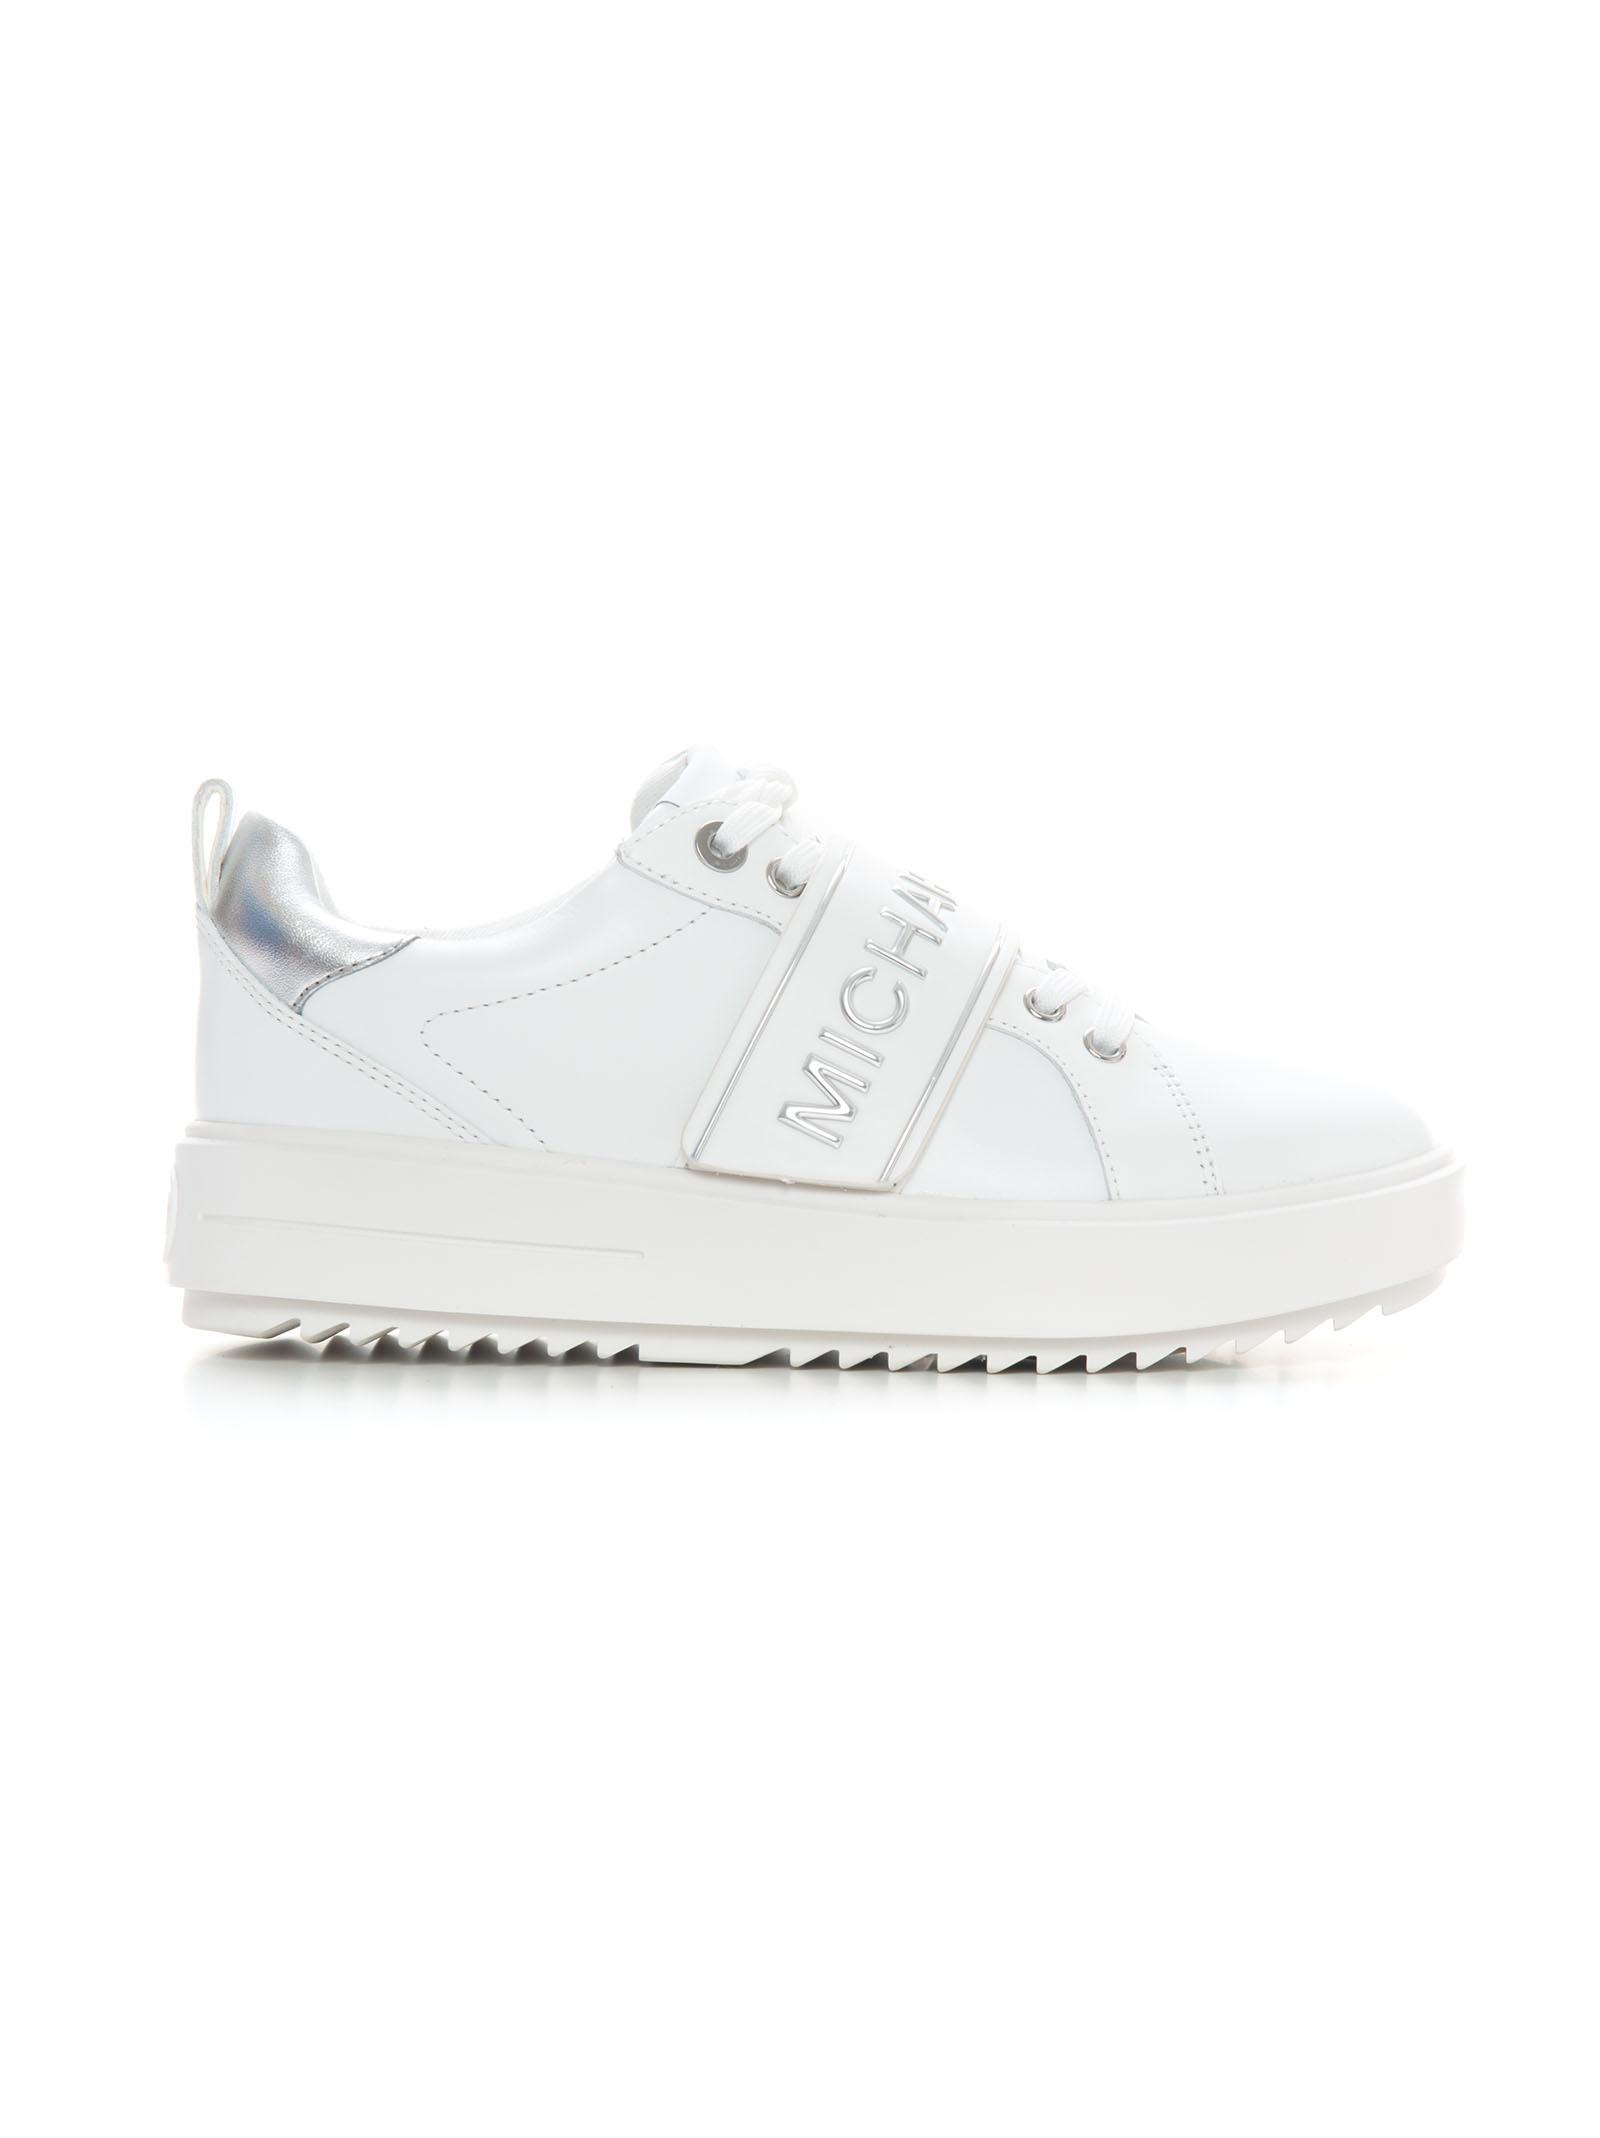 Michael Kors Emmett Strap Leather Sneakers With Laces White | Lyst